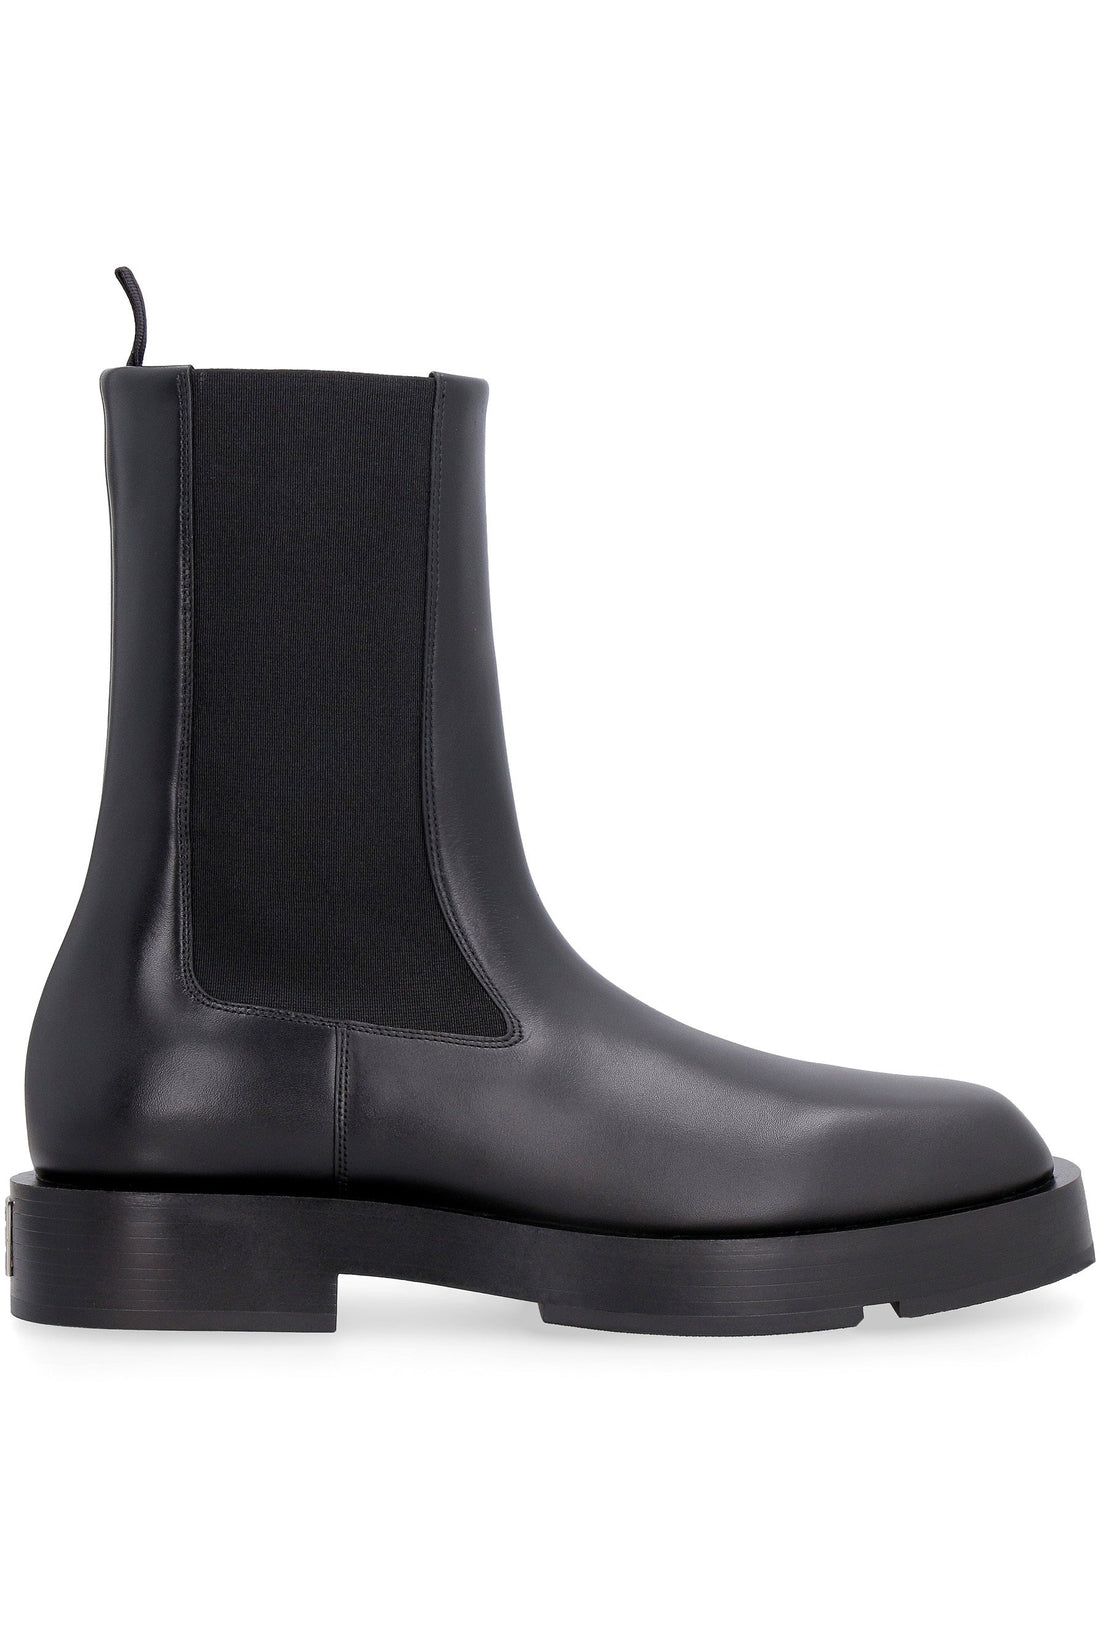 Givenchy-OUTLET-SALE-Leather Chelsea boots-ARCHIVIST